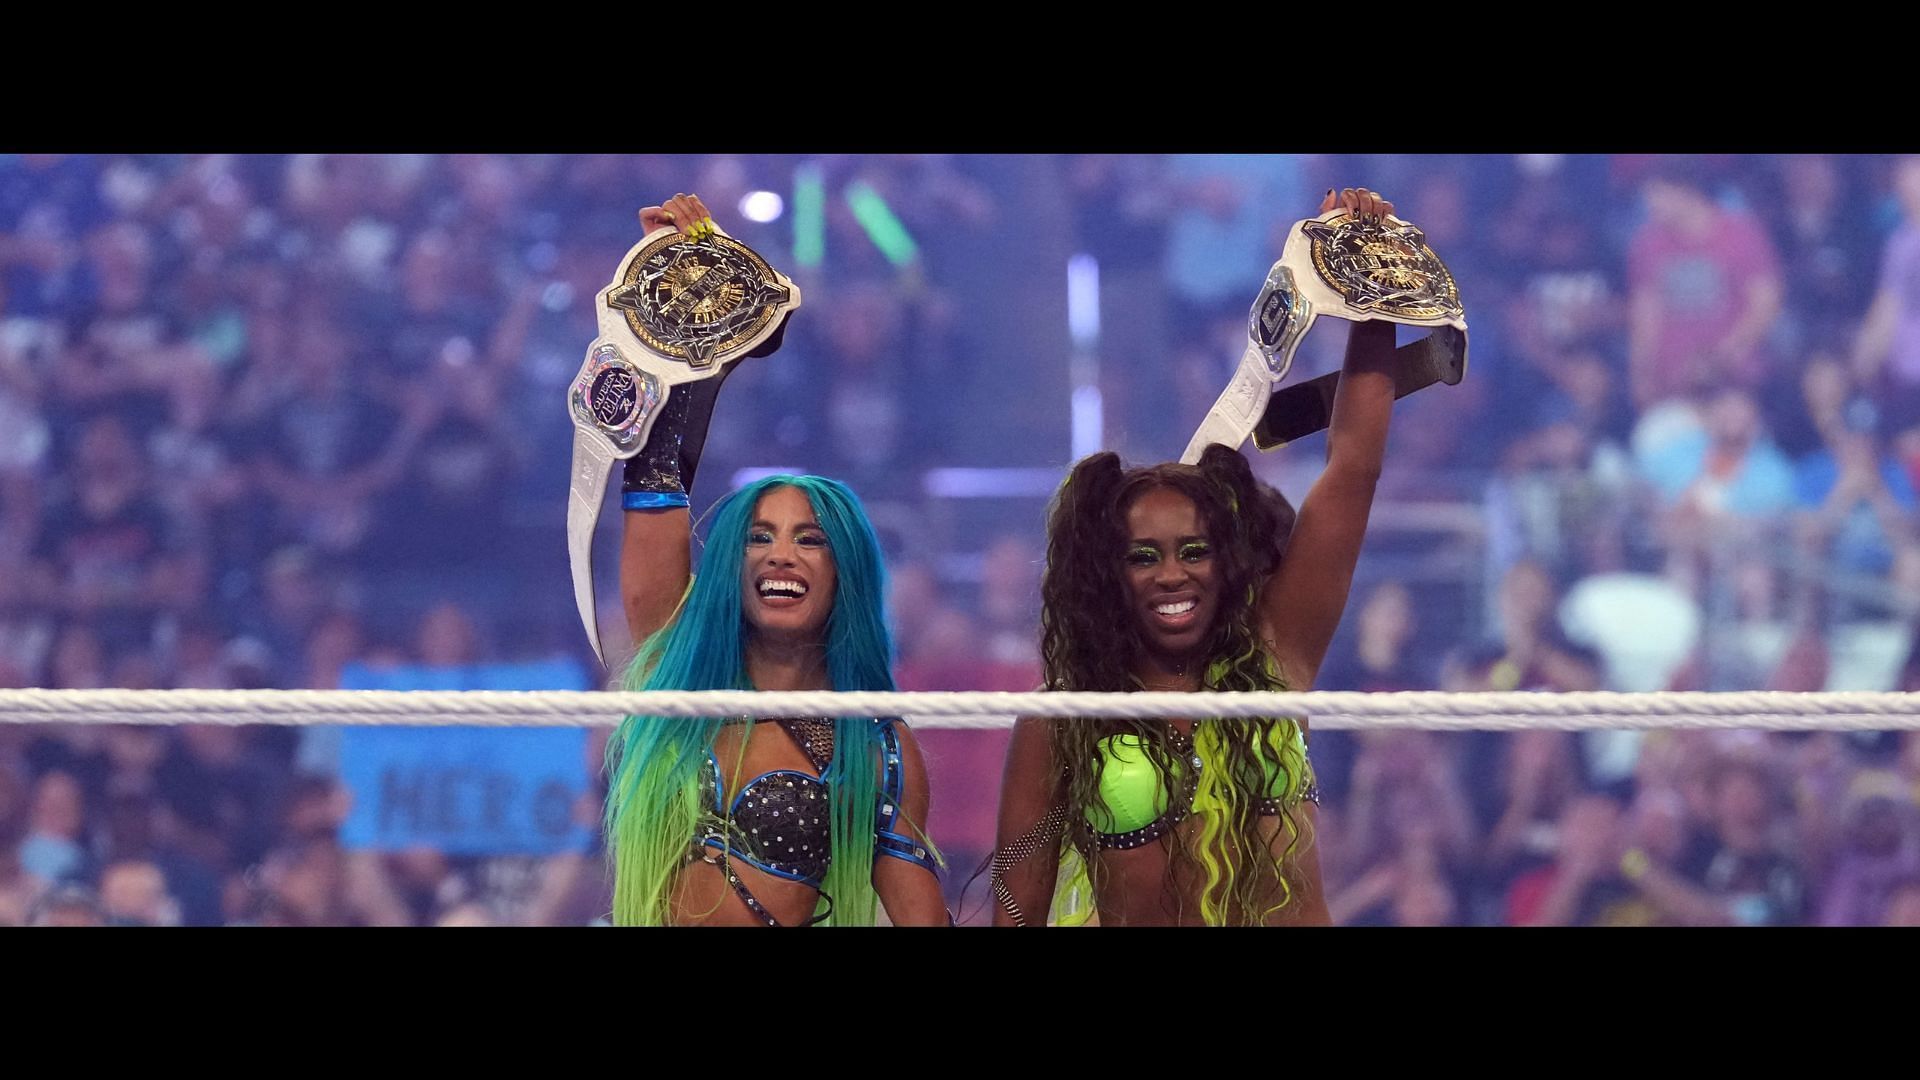 Sasha Banks and Naomi were last seen in WWE as the Women